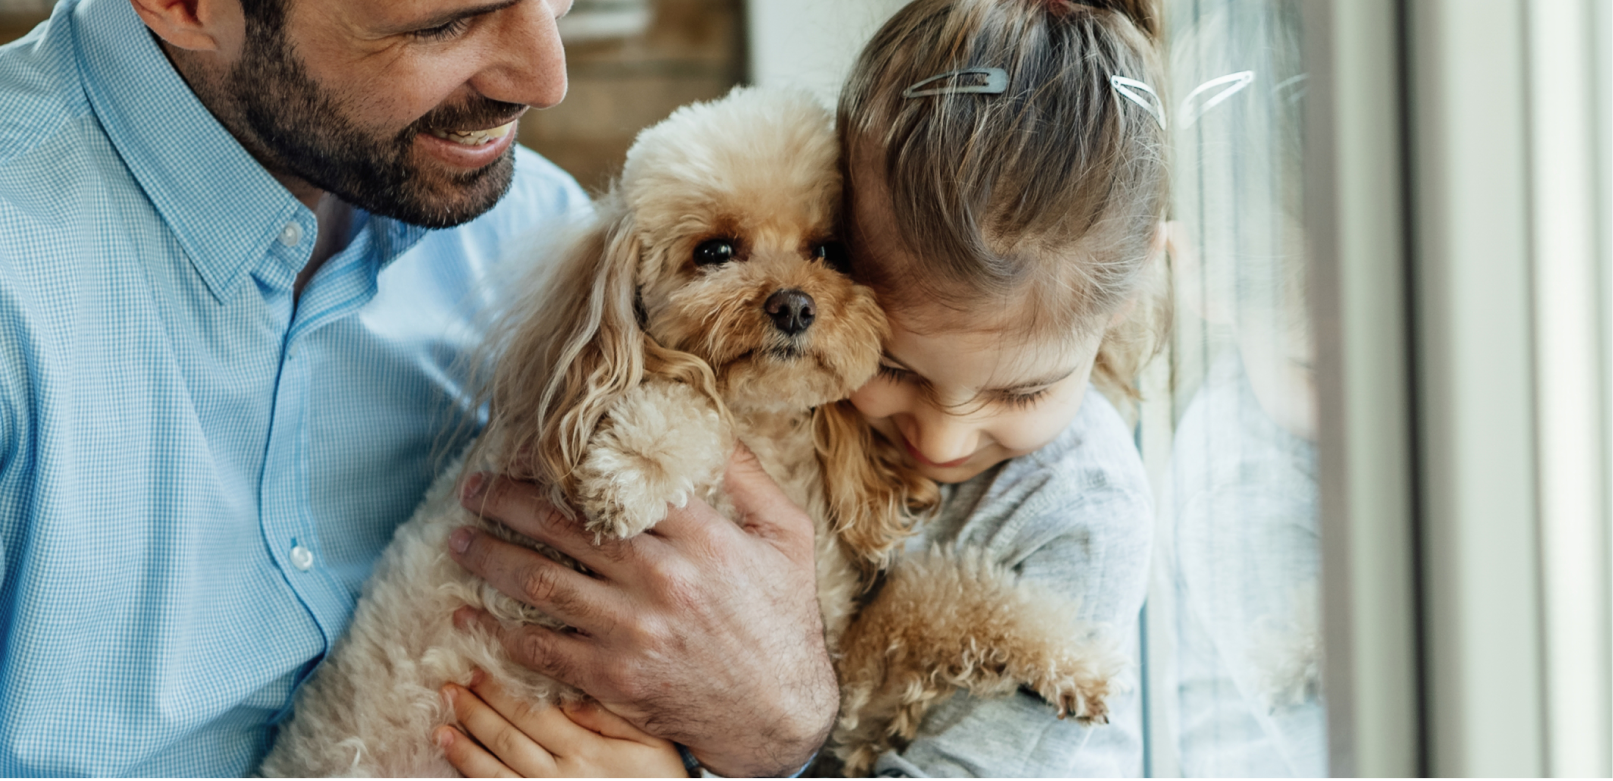 Choosing the Best Dog for a Special Needs Child